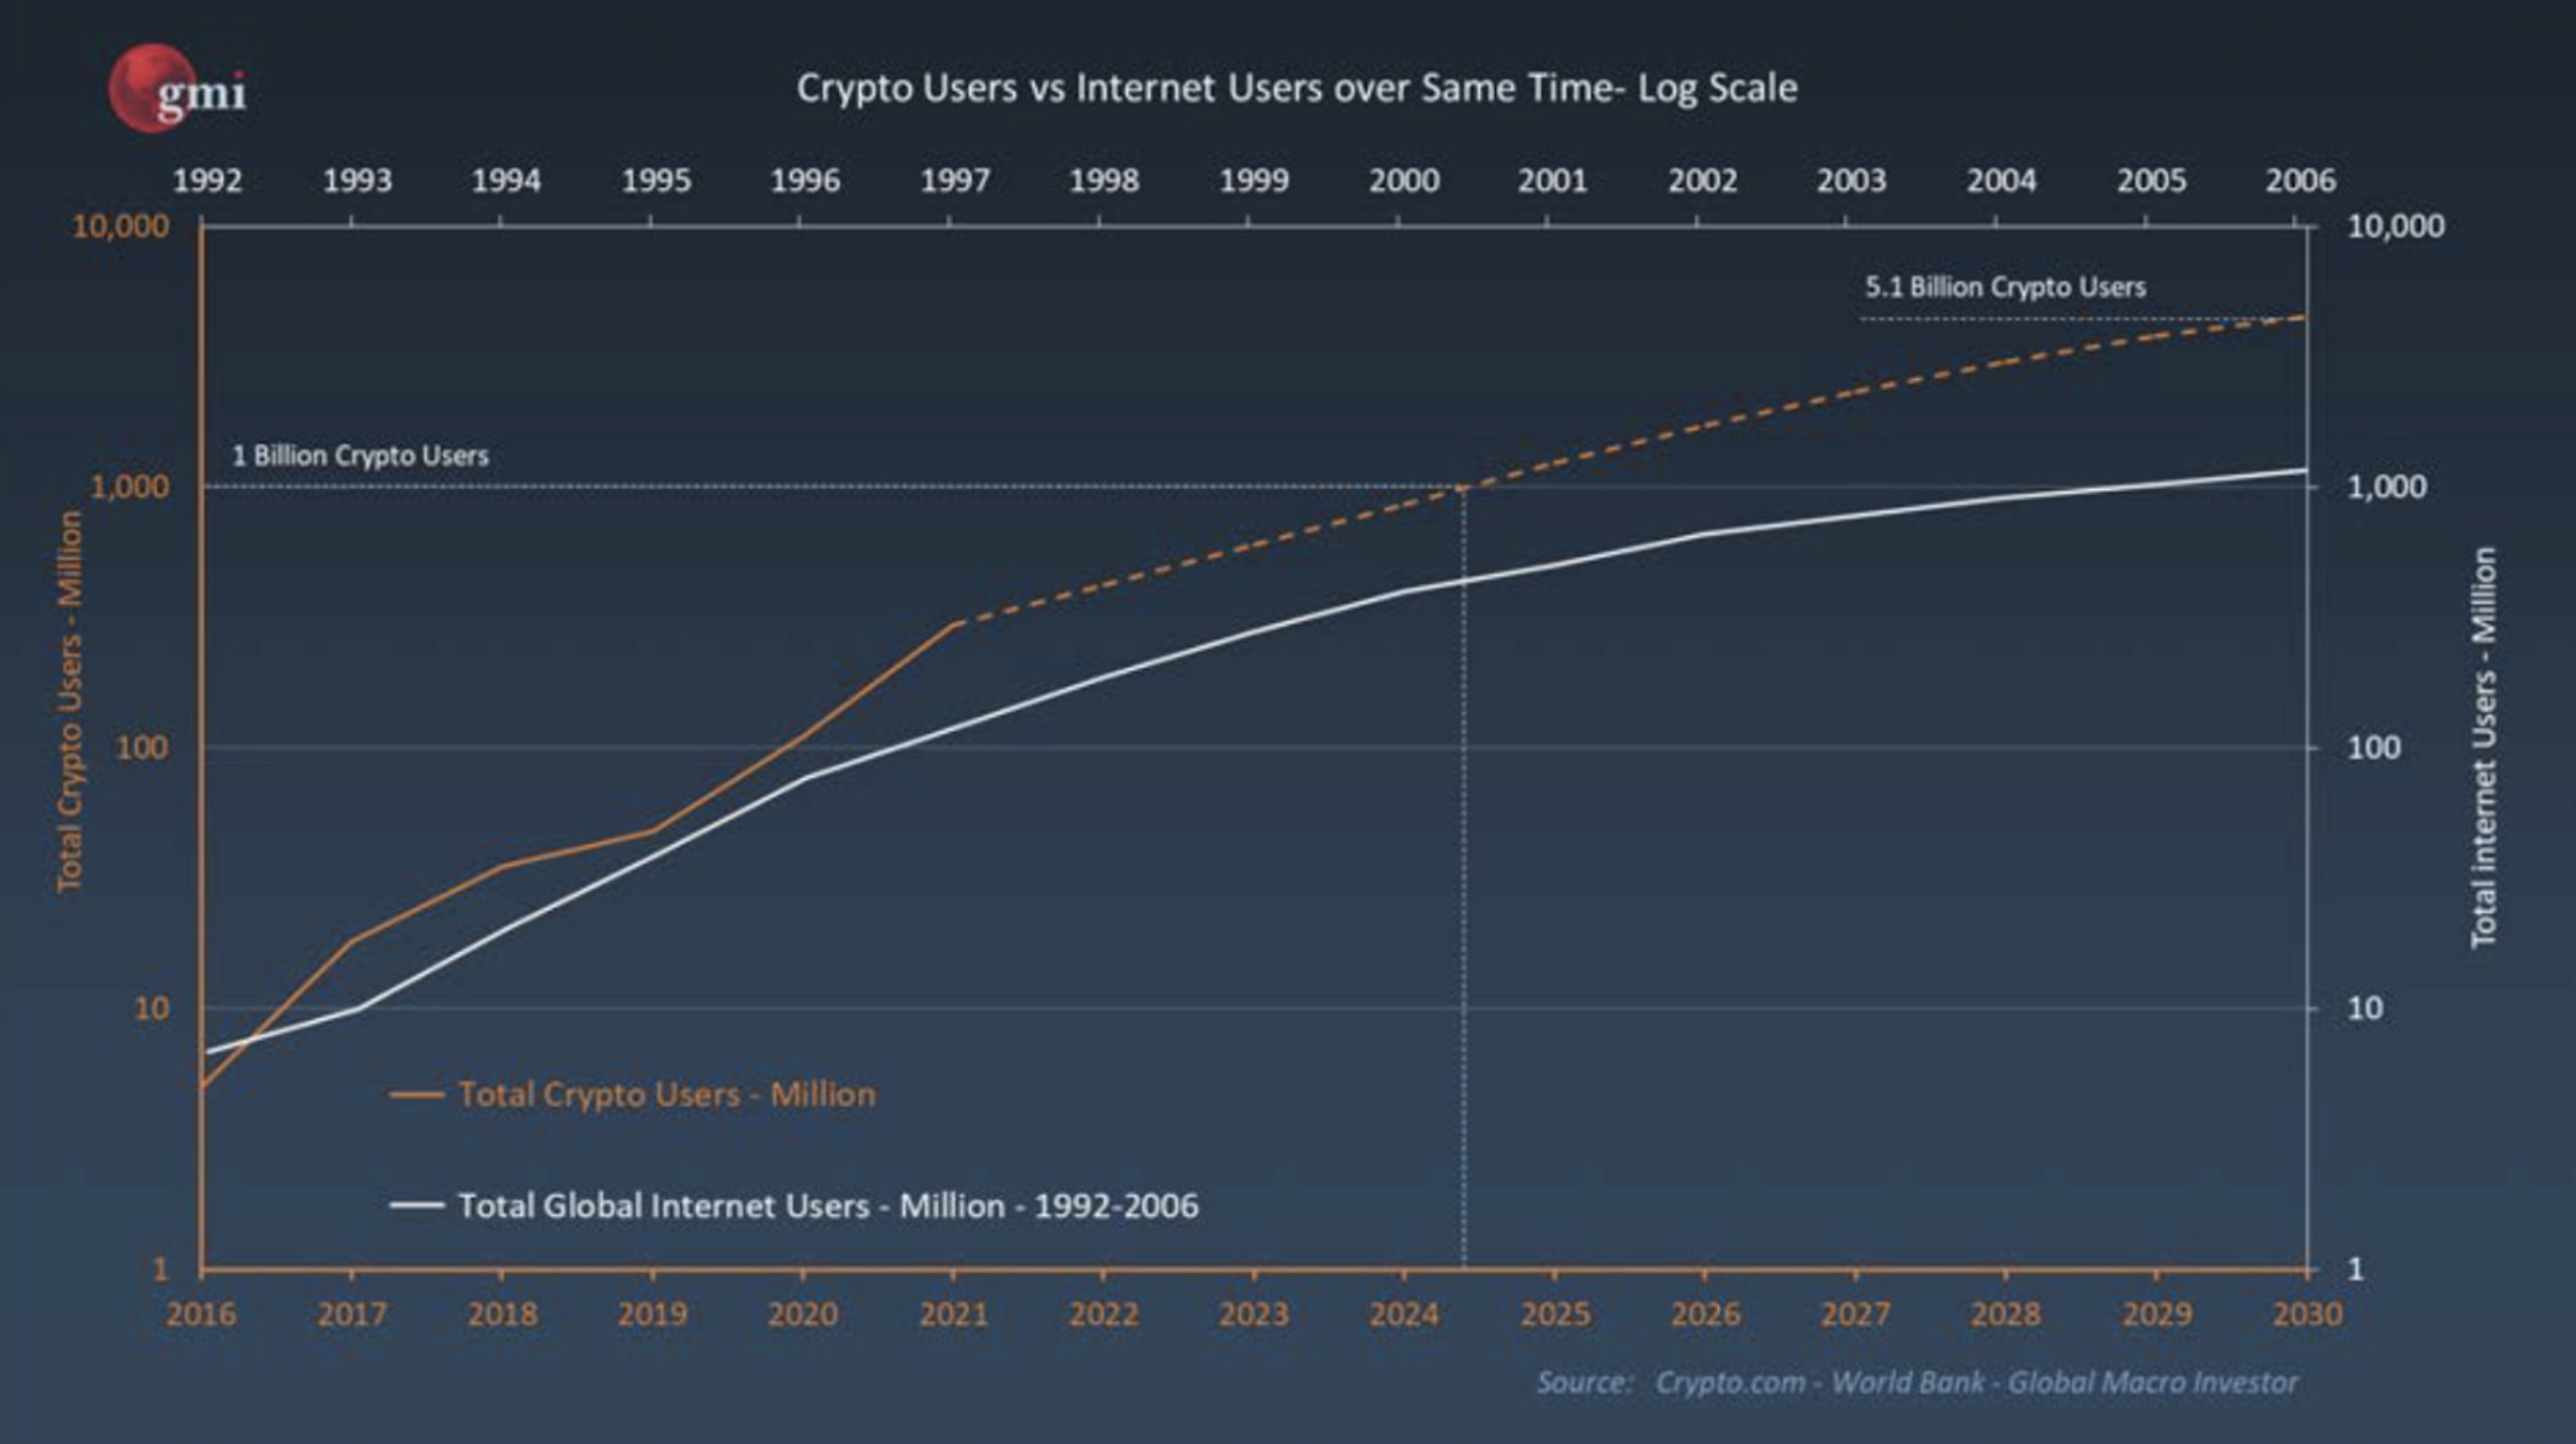 Crypto users vs. internet users on a logarithmic scale over the years zgiep.com